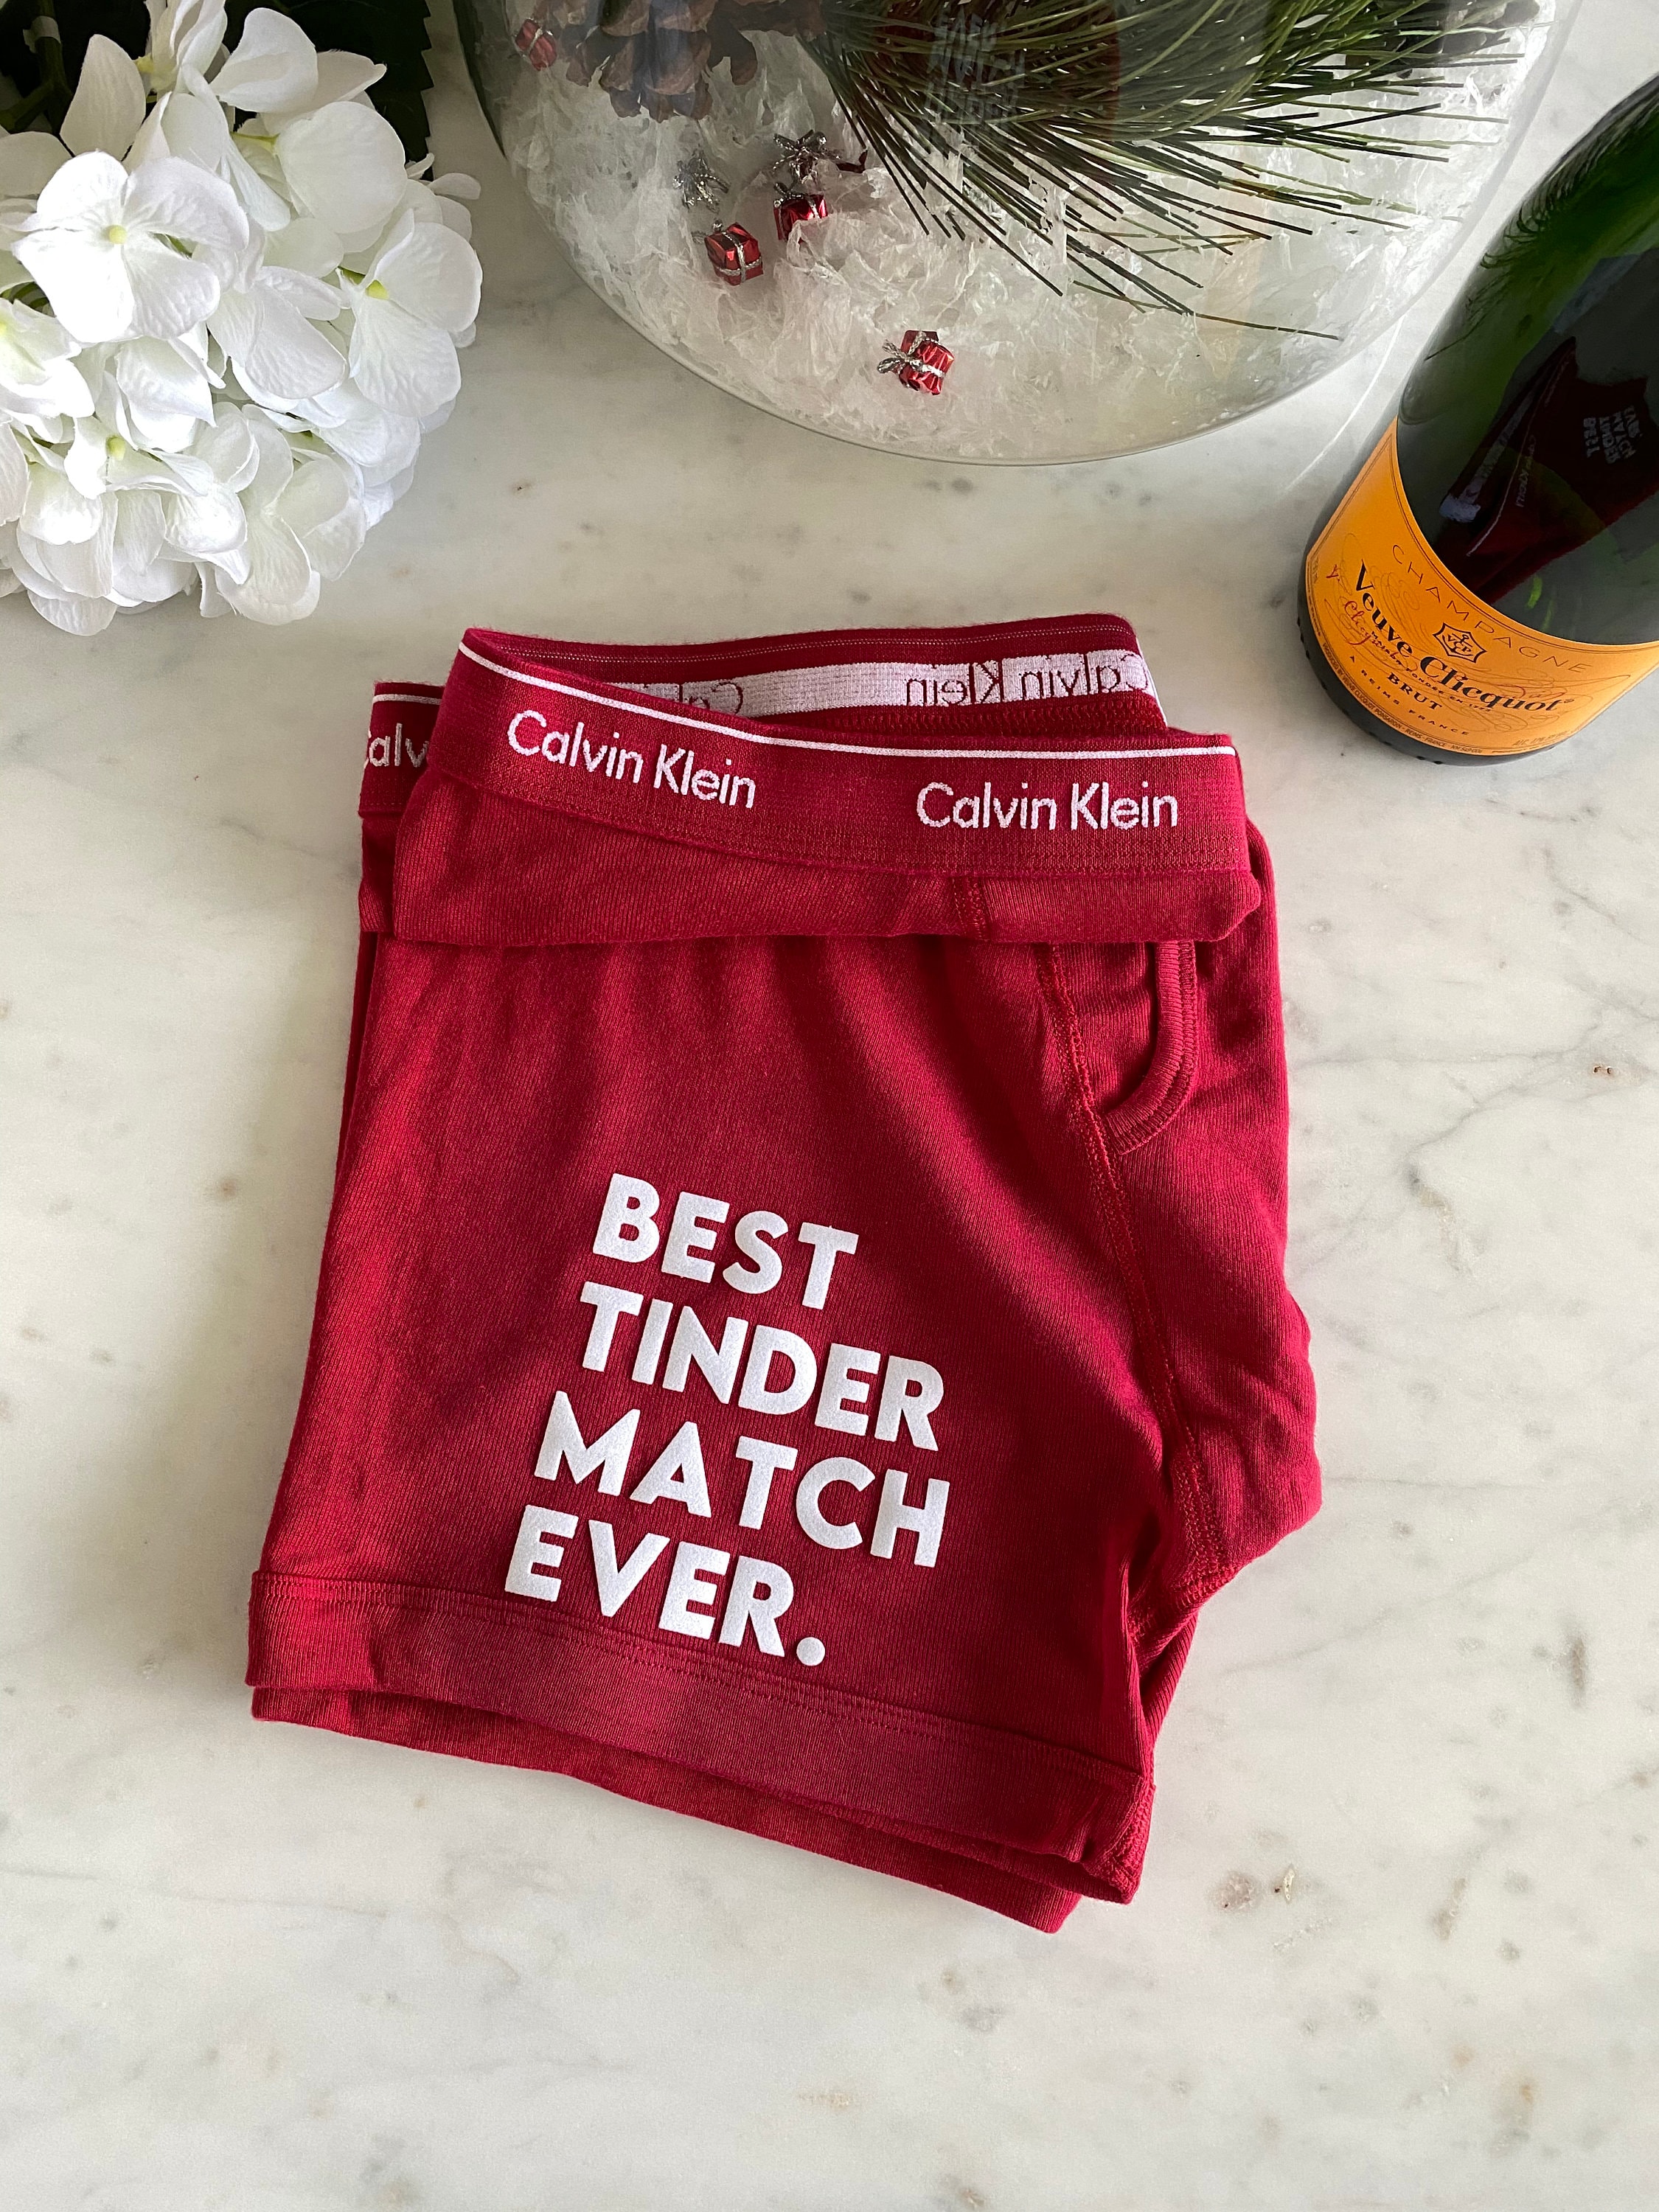 Calvin Klein and Victoria Secret Black Couples Best Tinder Match Ever  Personalized Boxer Briefs Personalized Panties FAST SHIPPING -  Sweden